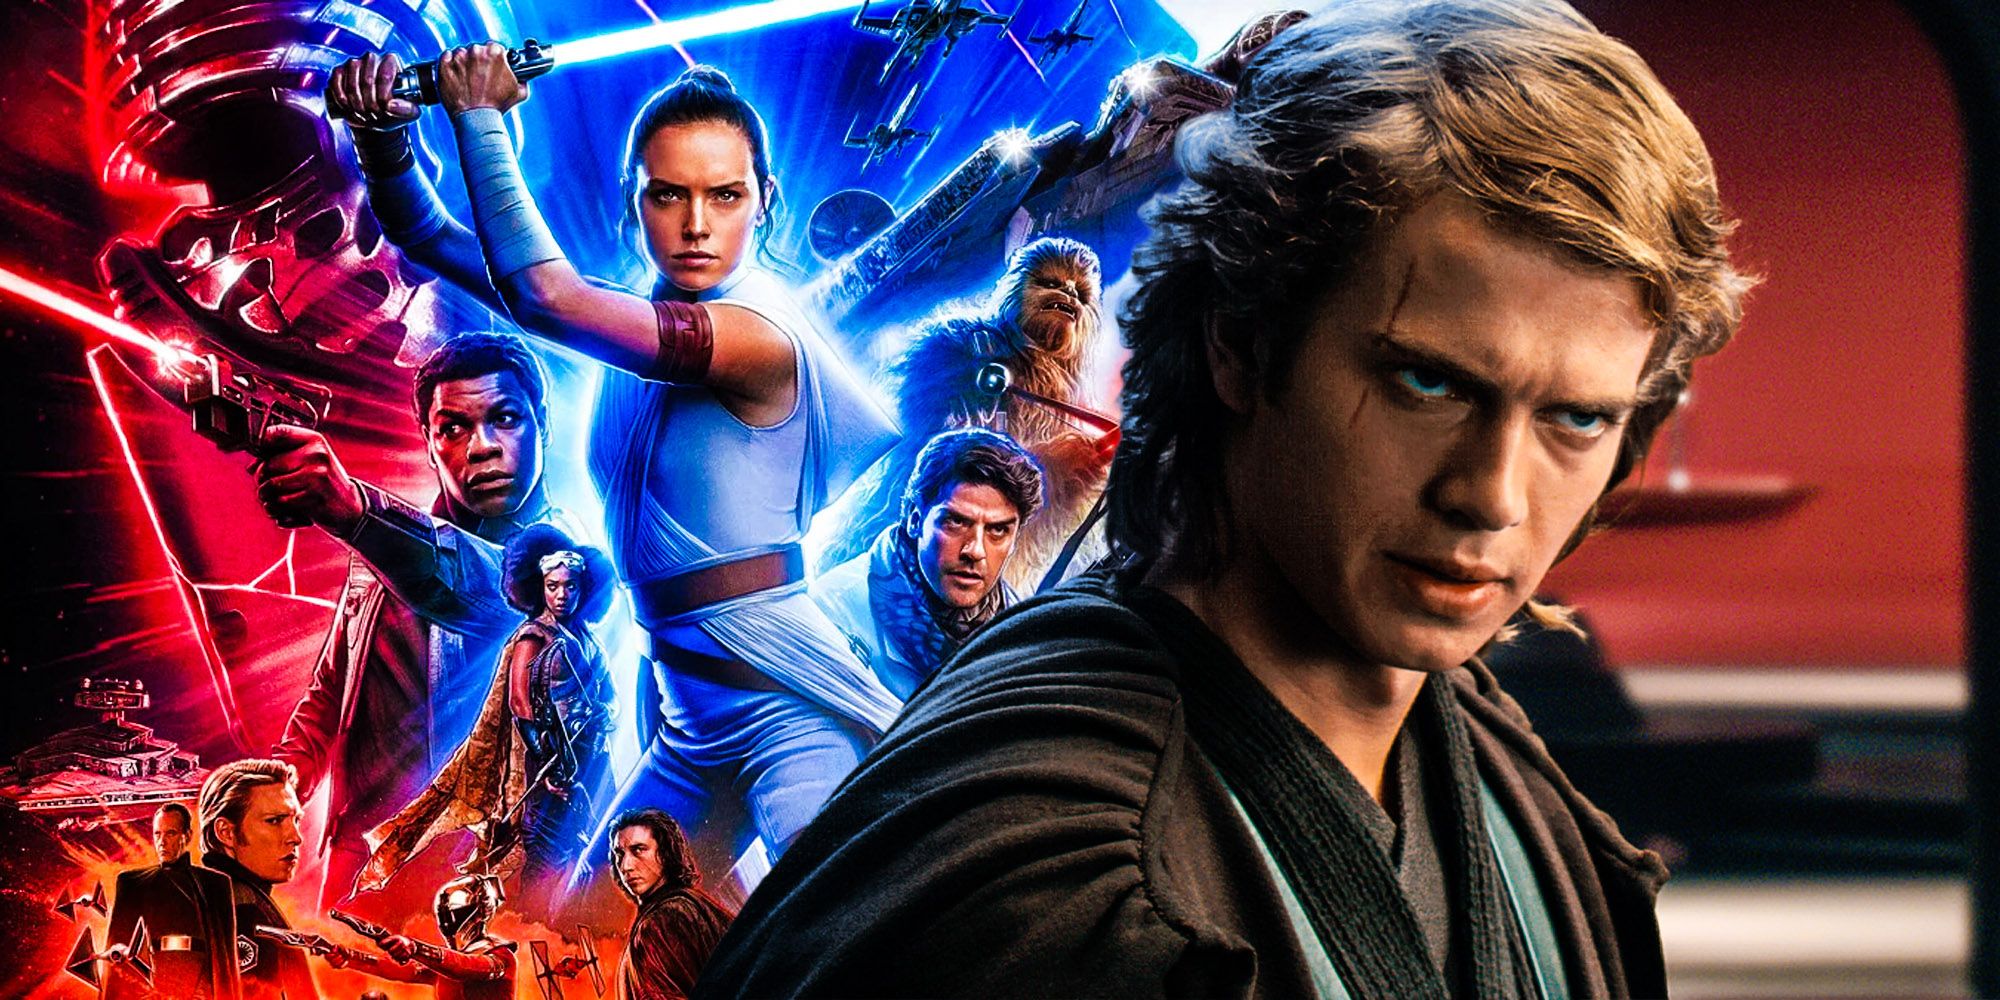 Star Wars Sequels Were Too Focused on Fixing Things That Weren’t Problems